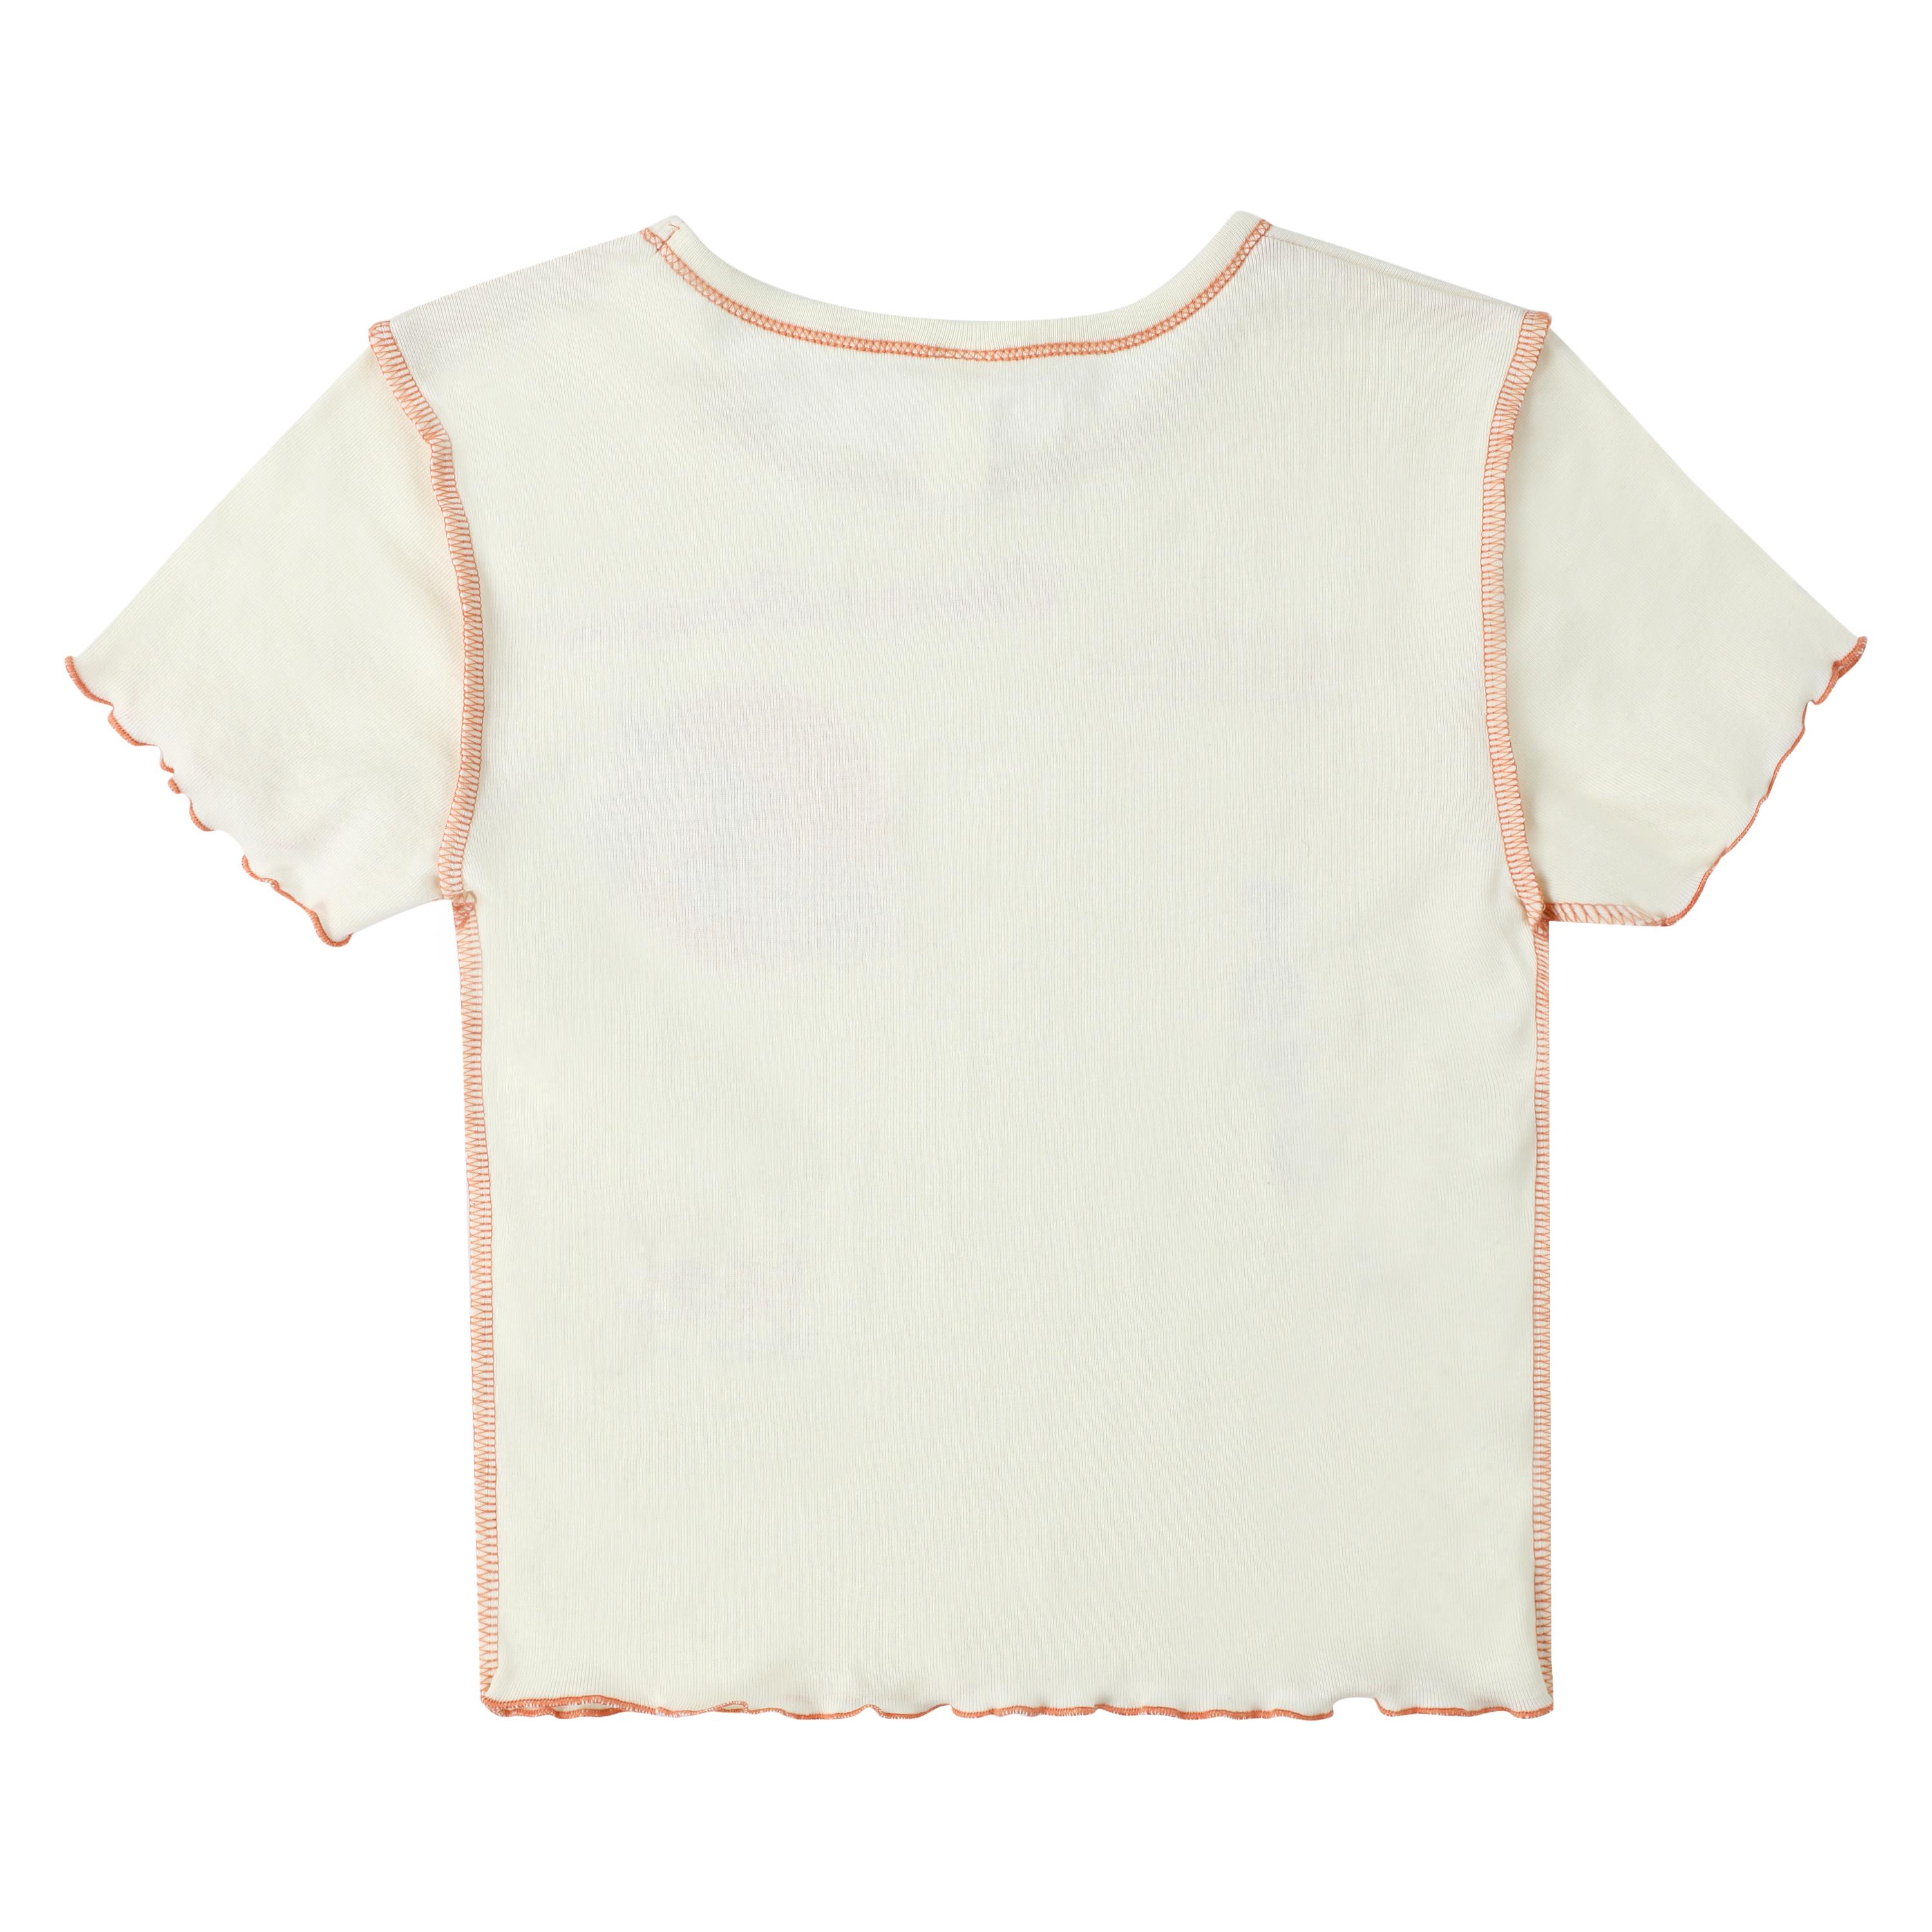 Tokyo Cherry Blossom Baby Tee With Lettuce Edge